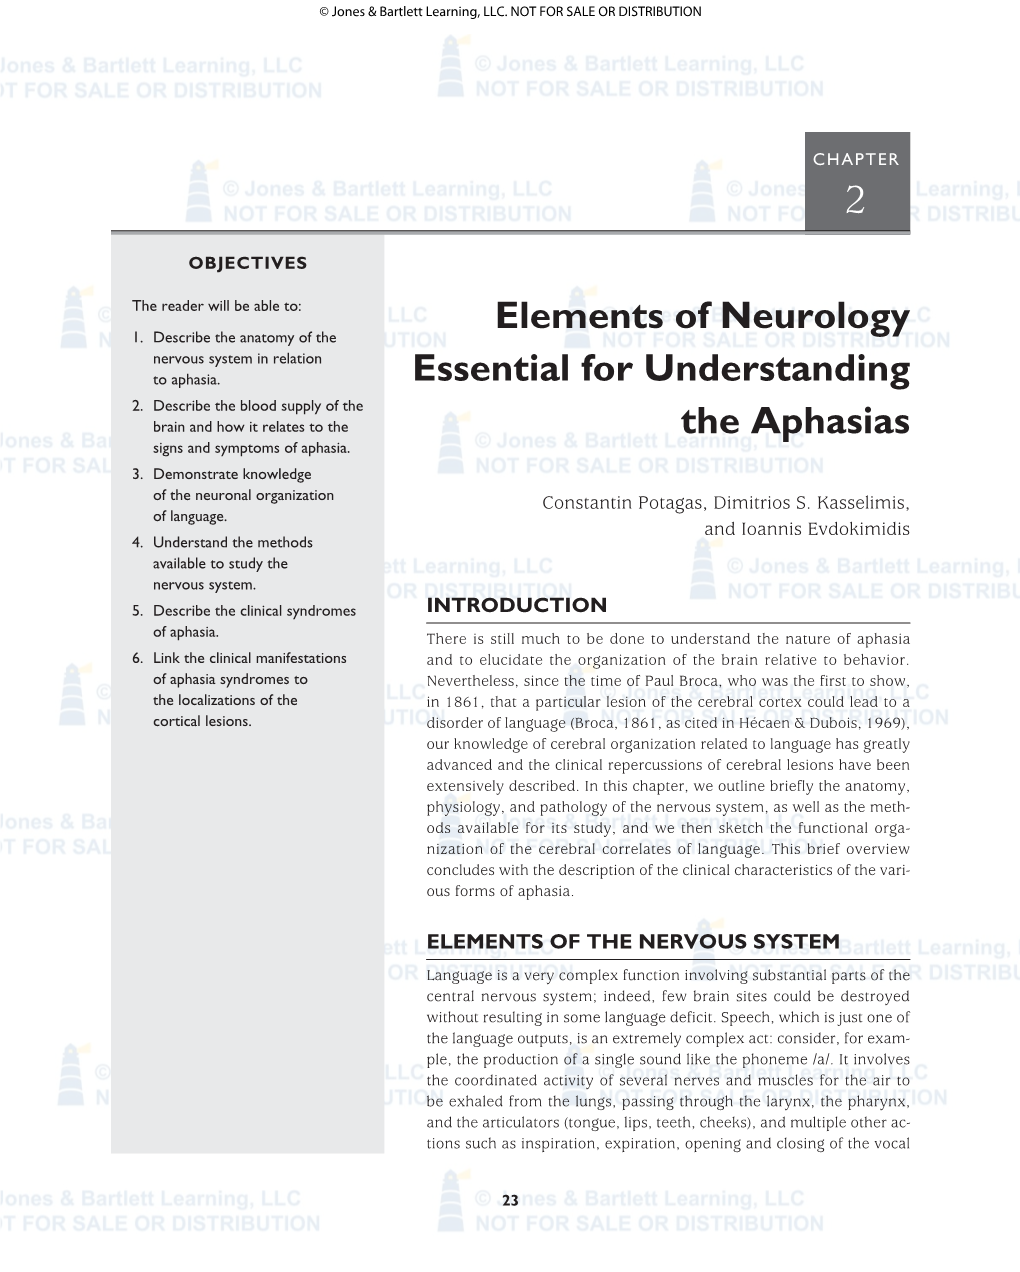 Elements of Neurology Essential for Understanding the Aphasias | 25